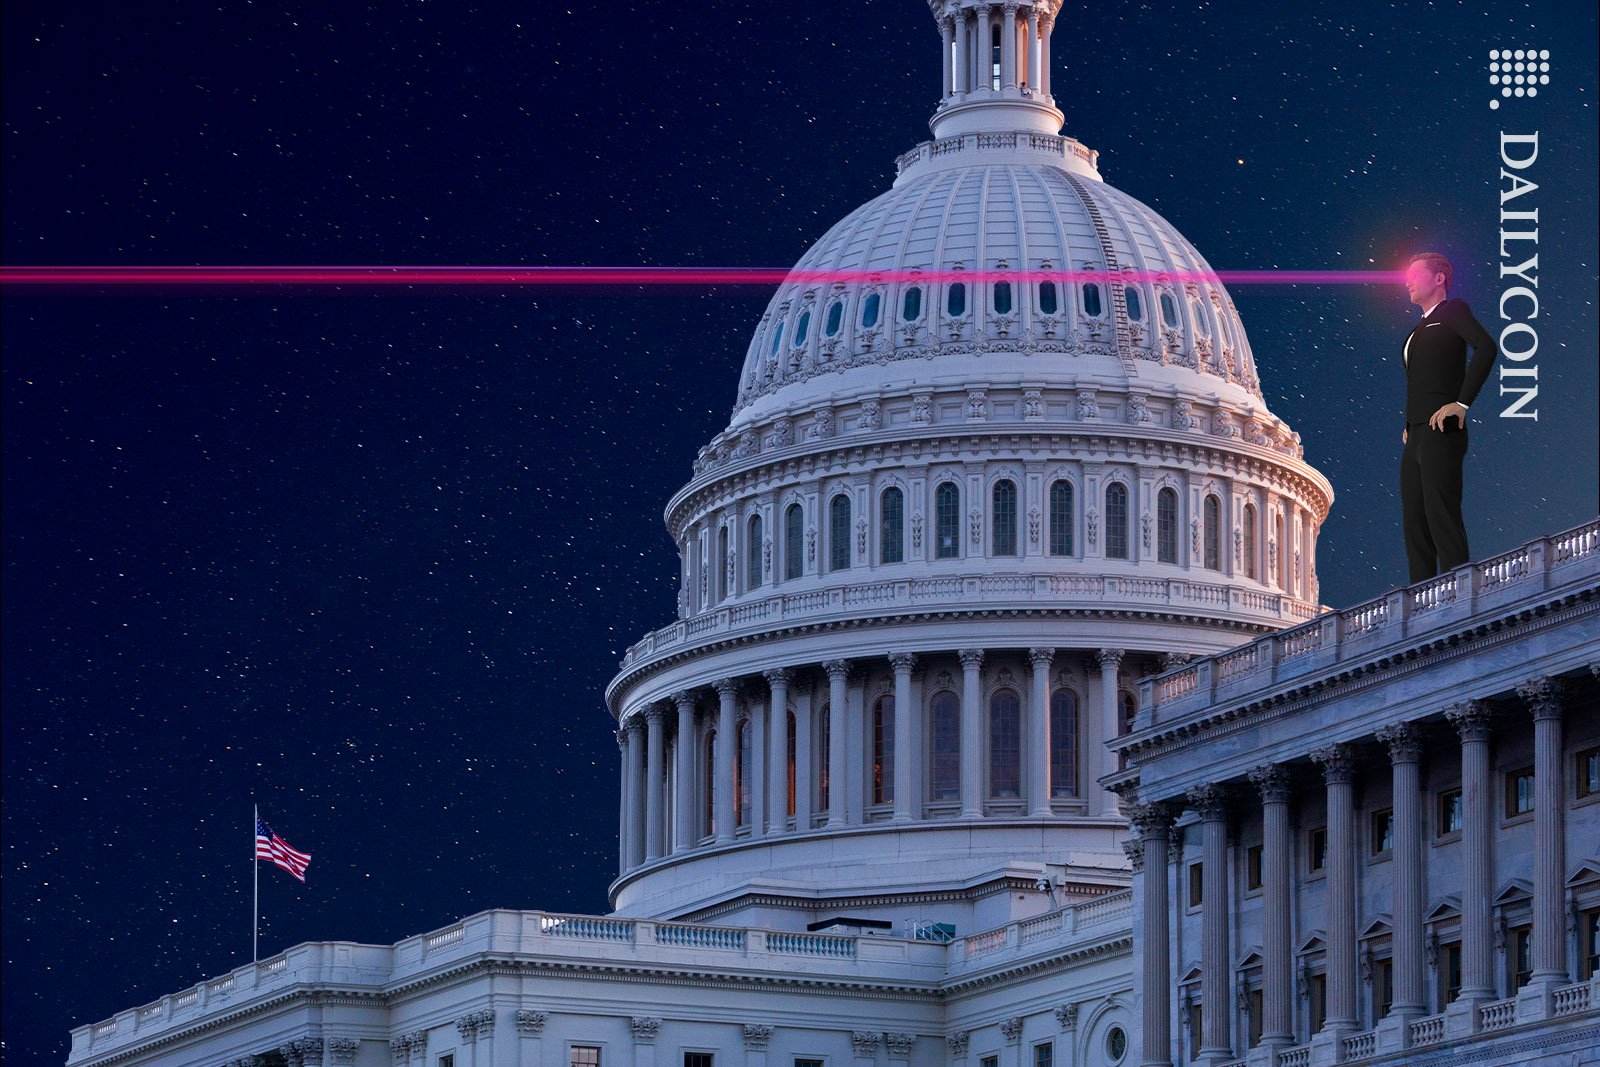 Man in black suit standing on top of the Capitol building projecting red laser beam from his eyes.